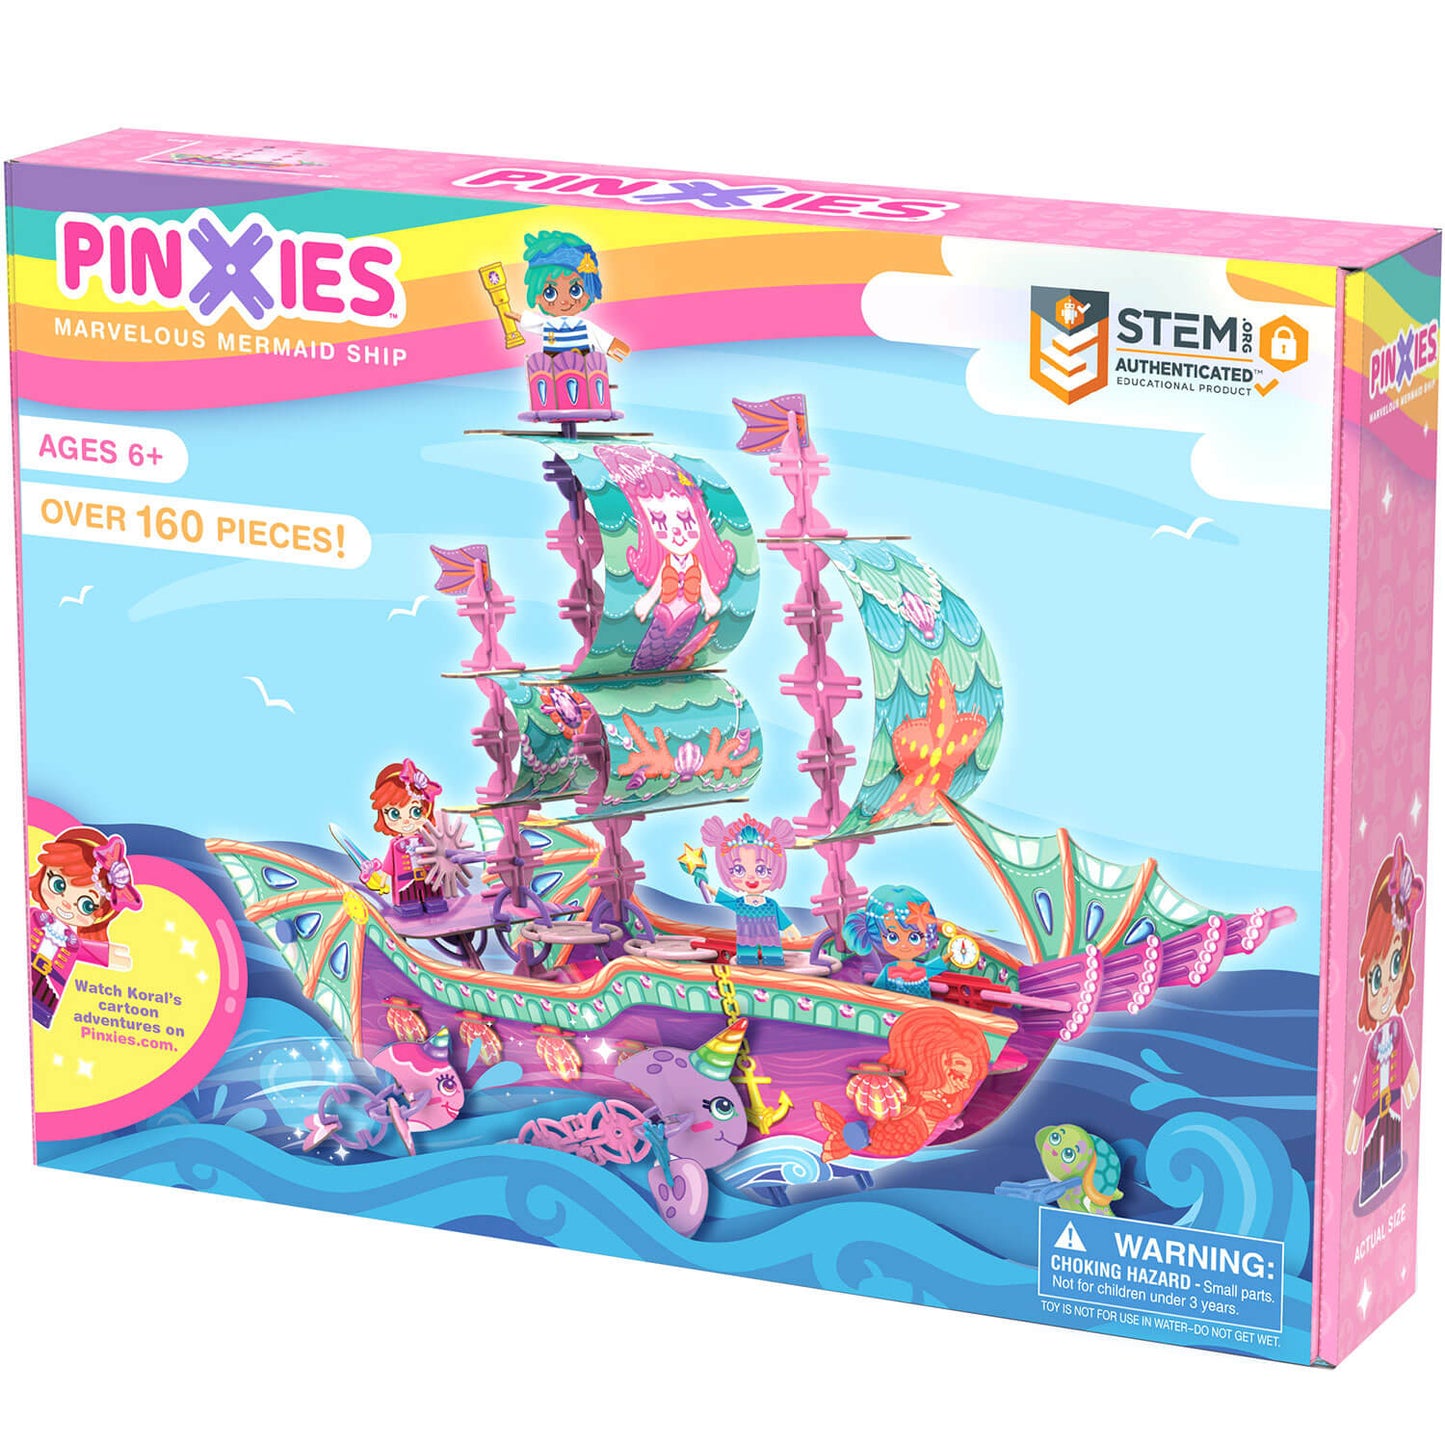 Pinxies Marvelous Mermaid Ship is a STEM authenticated building set for ages 6+